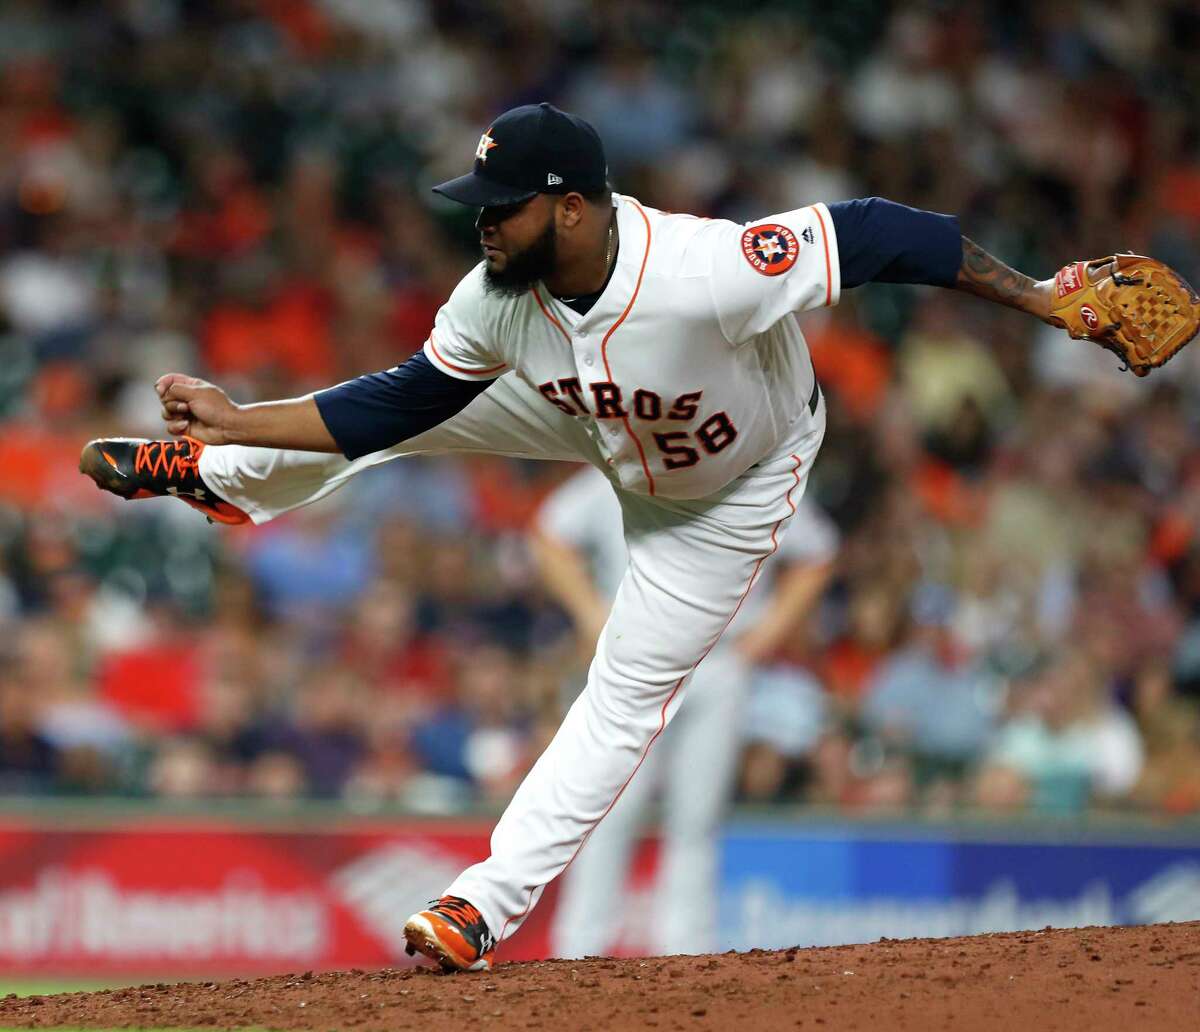 Francis Martes matured years before he debuted with Astros